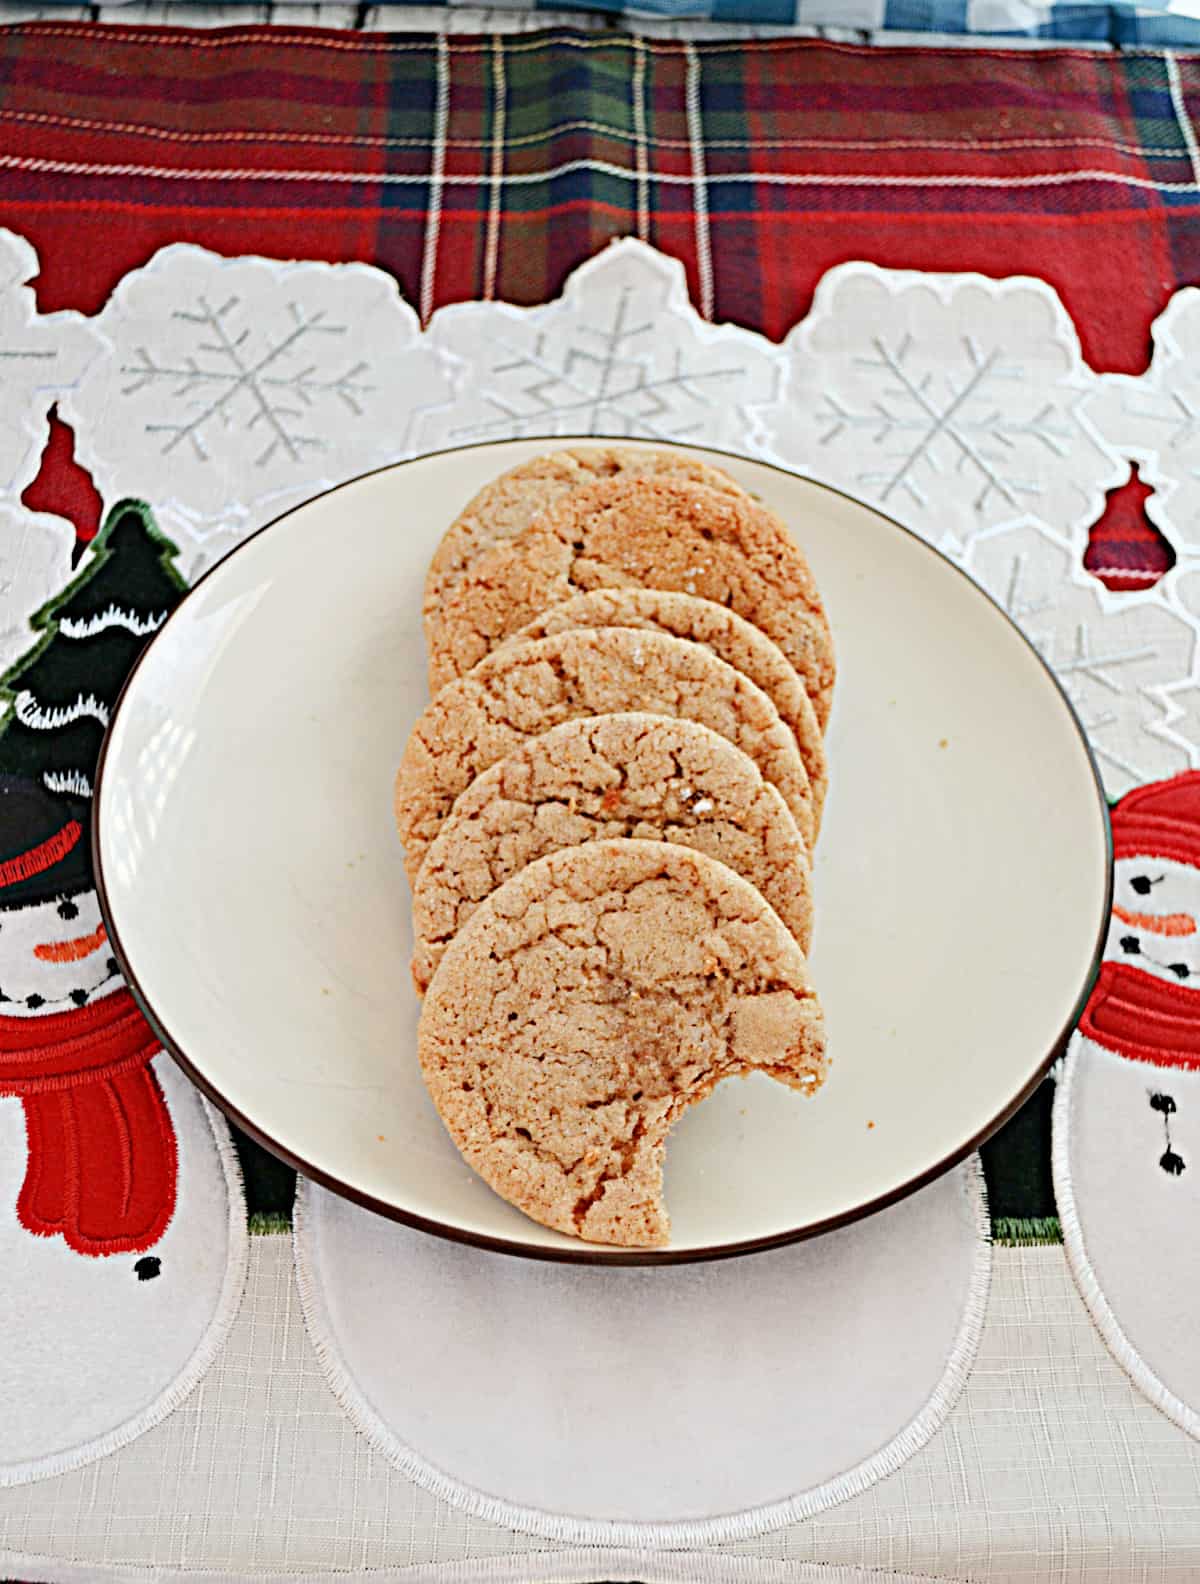 A plate of snickerdoodle cookies layered on top of each other with the last cookie having a bite taken out of it.